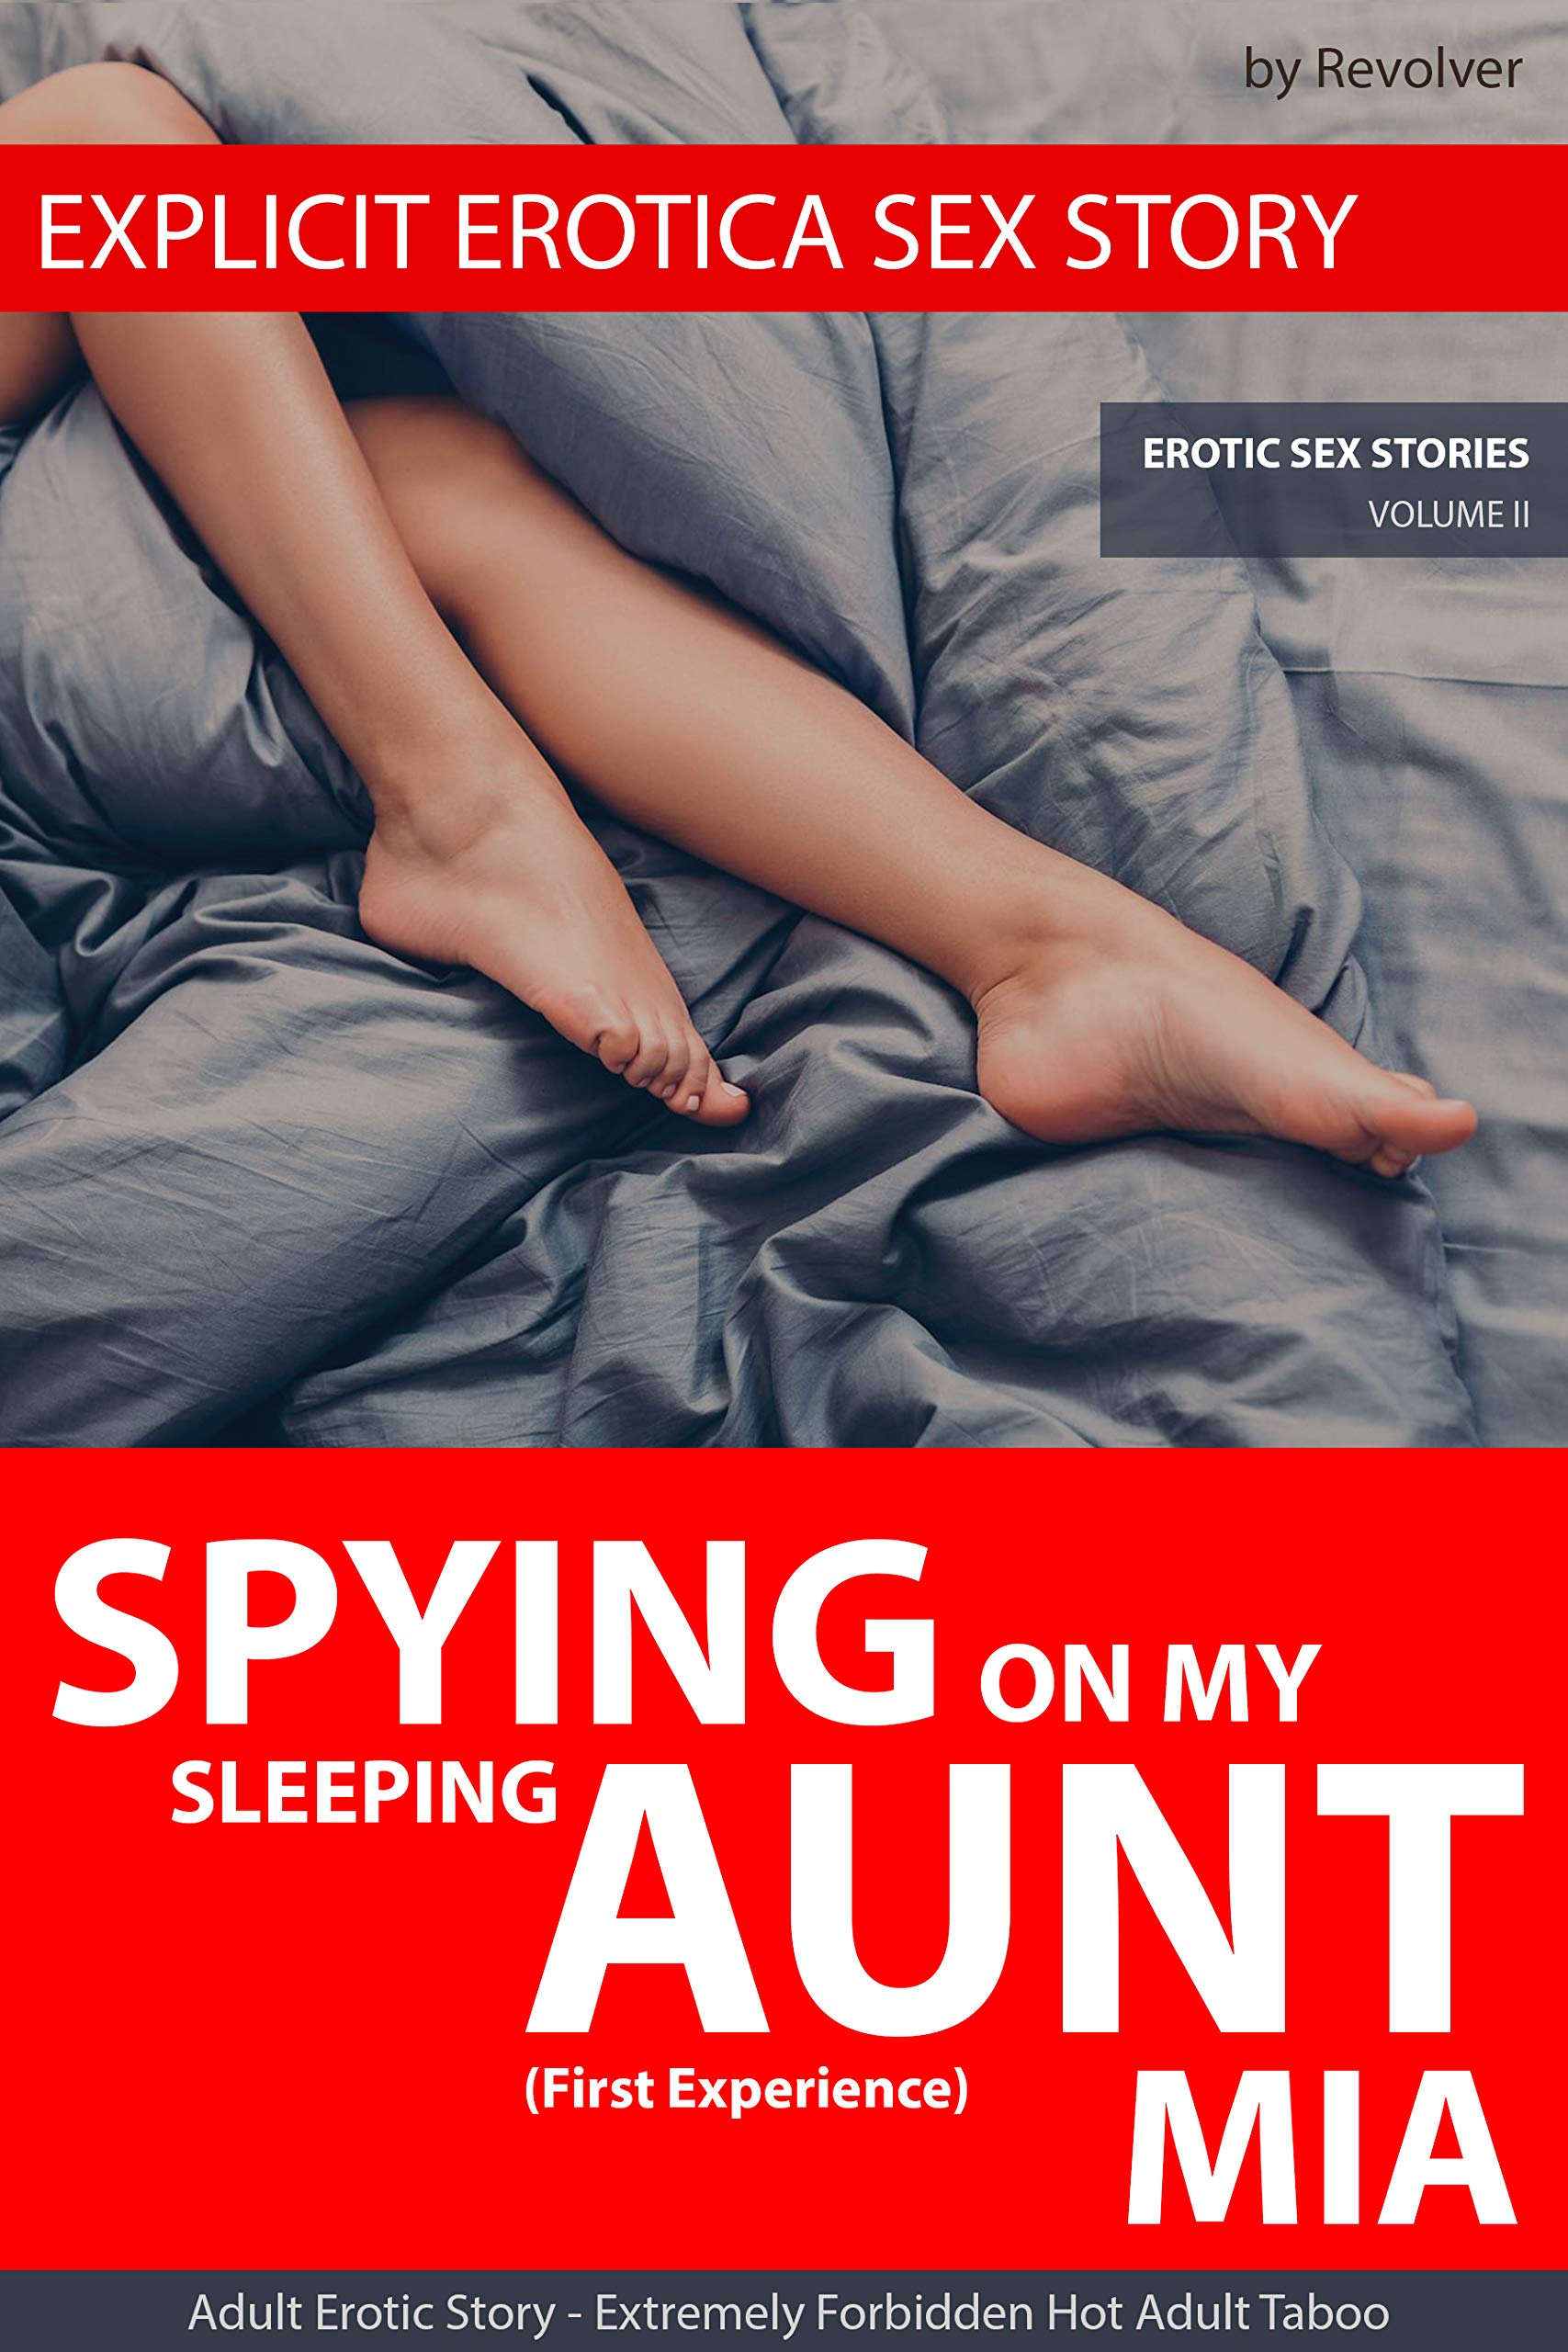 claire blatchford recommends sex with aunt stories pic